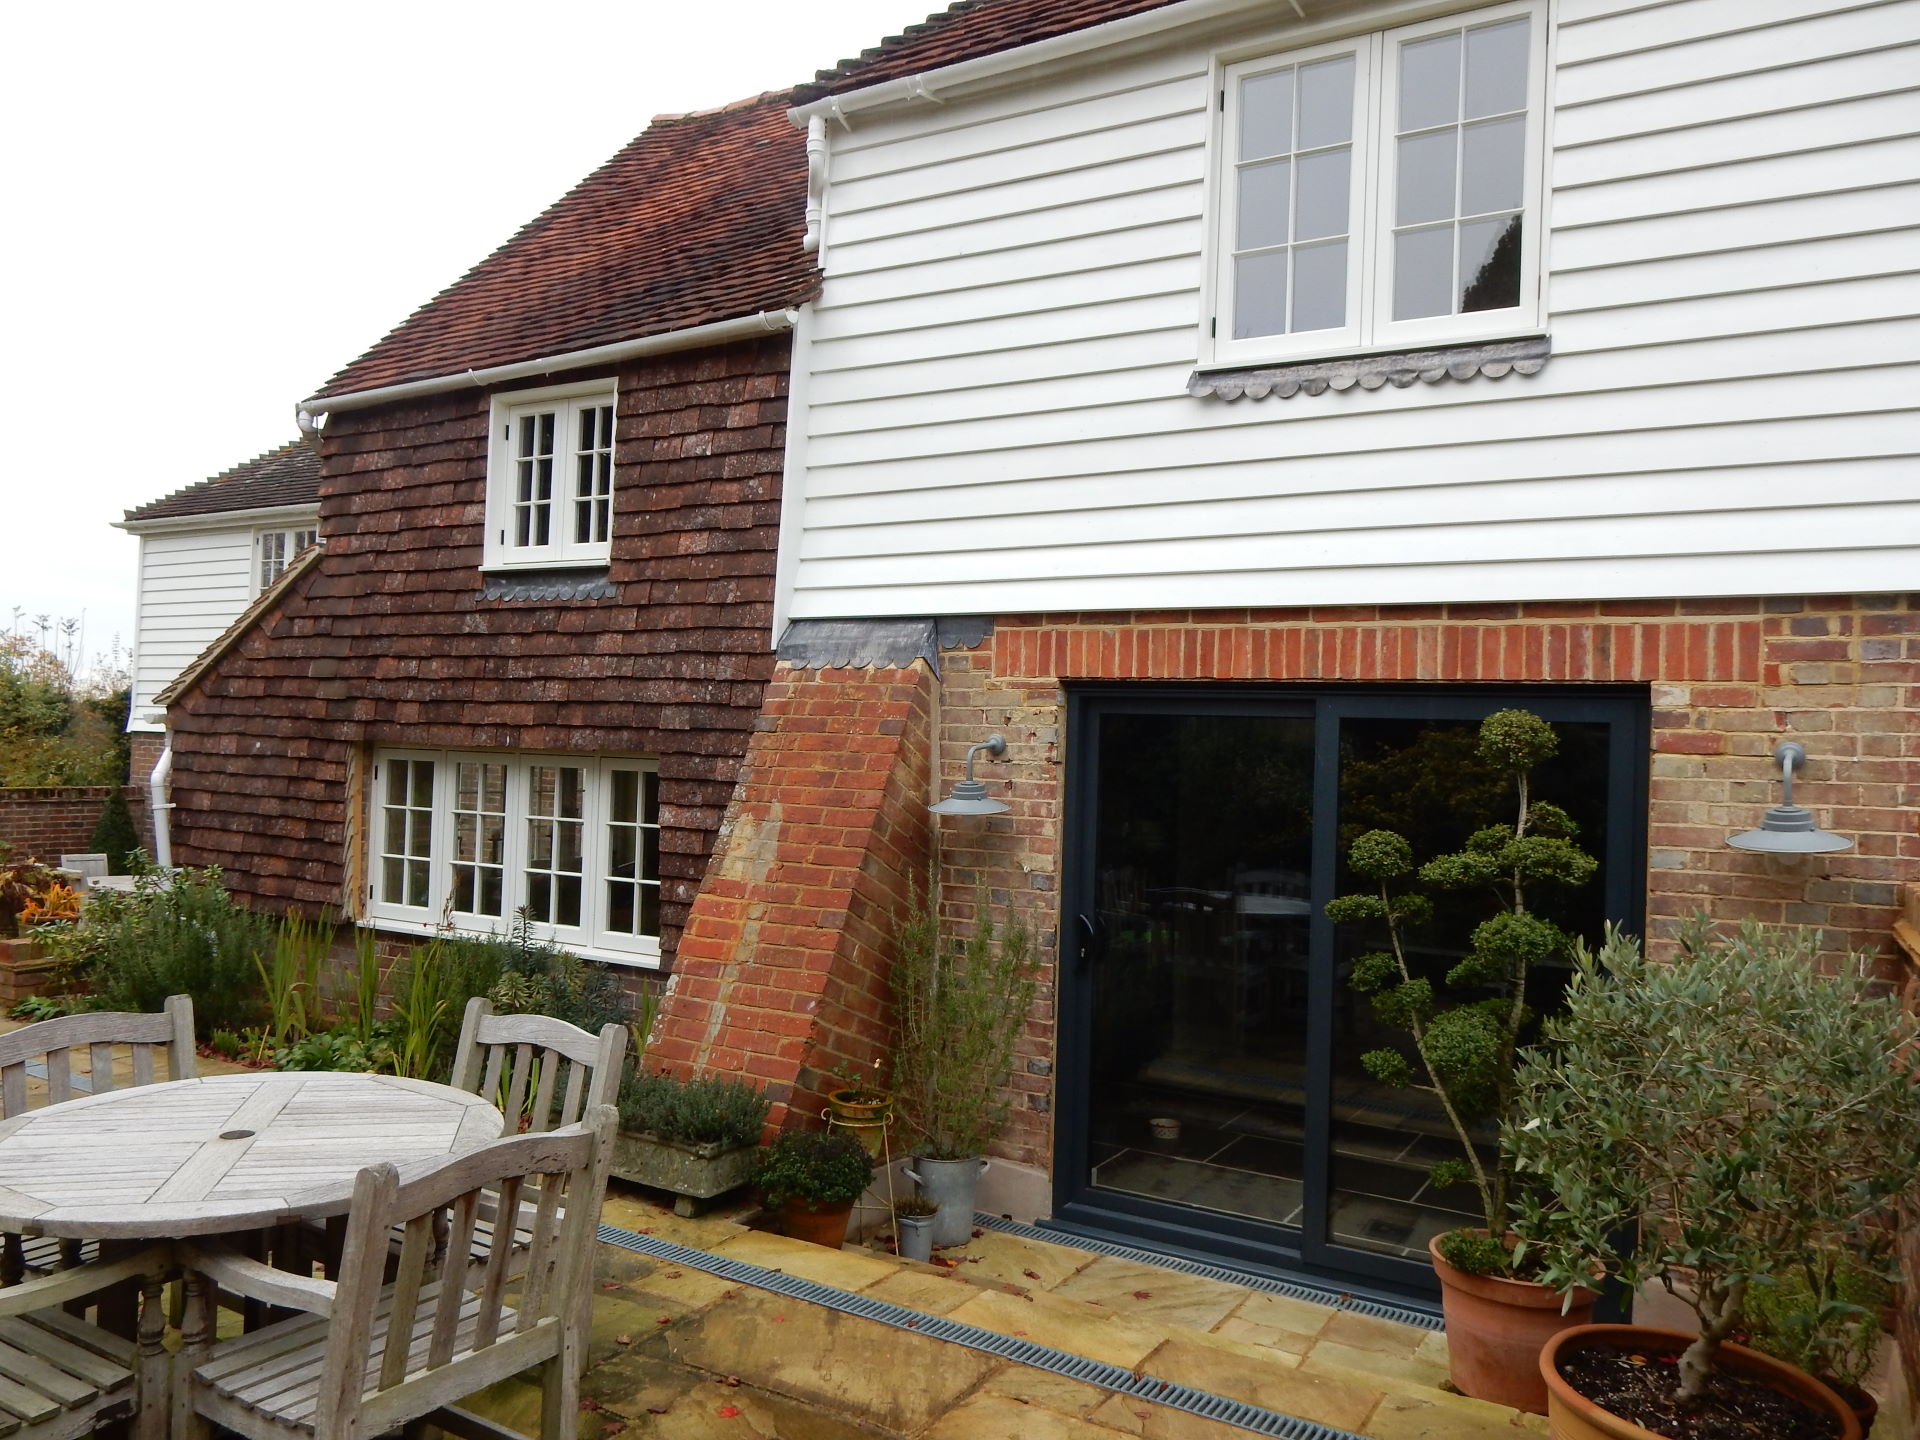 Parker Joinery supply Bereco traditional casement windows for Cooksbridge property renovation